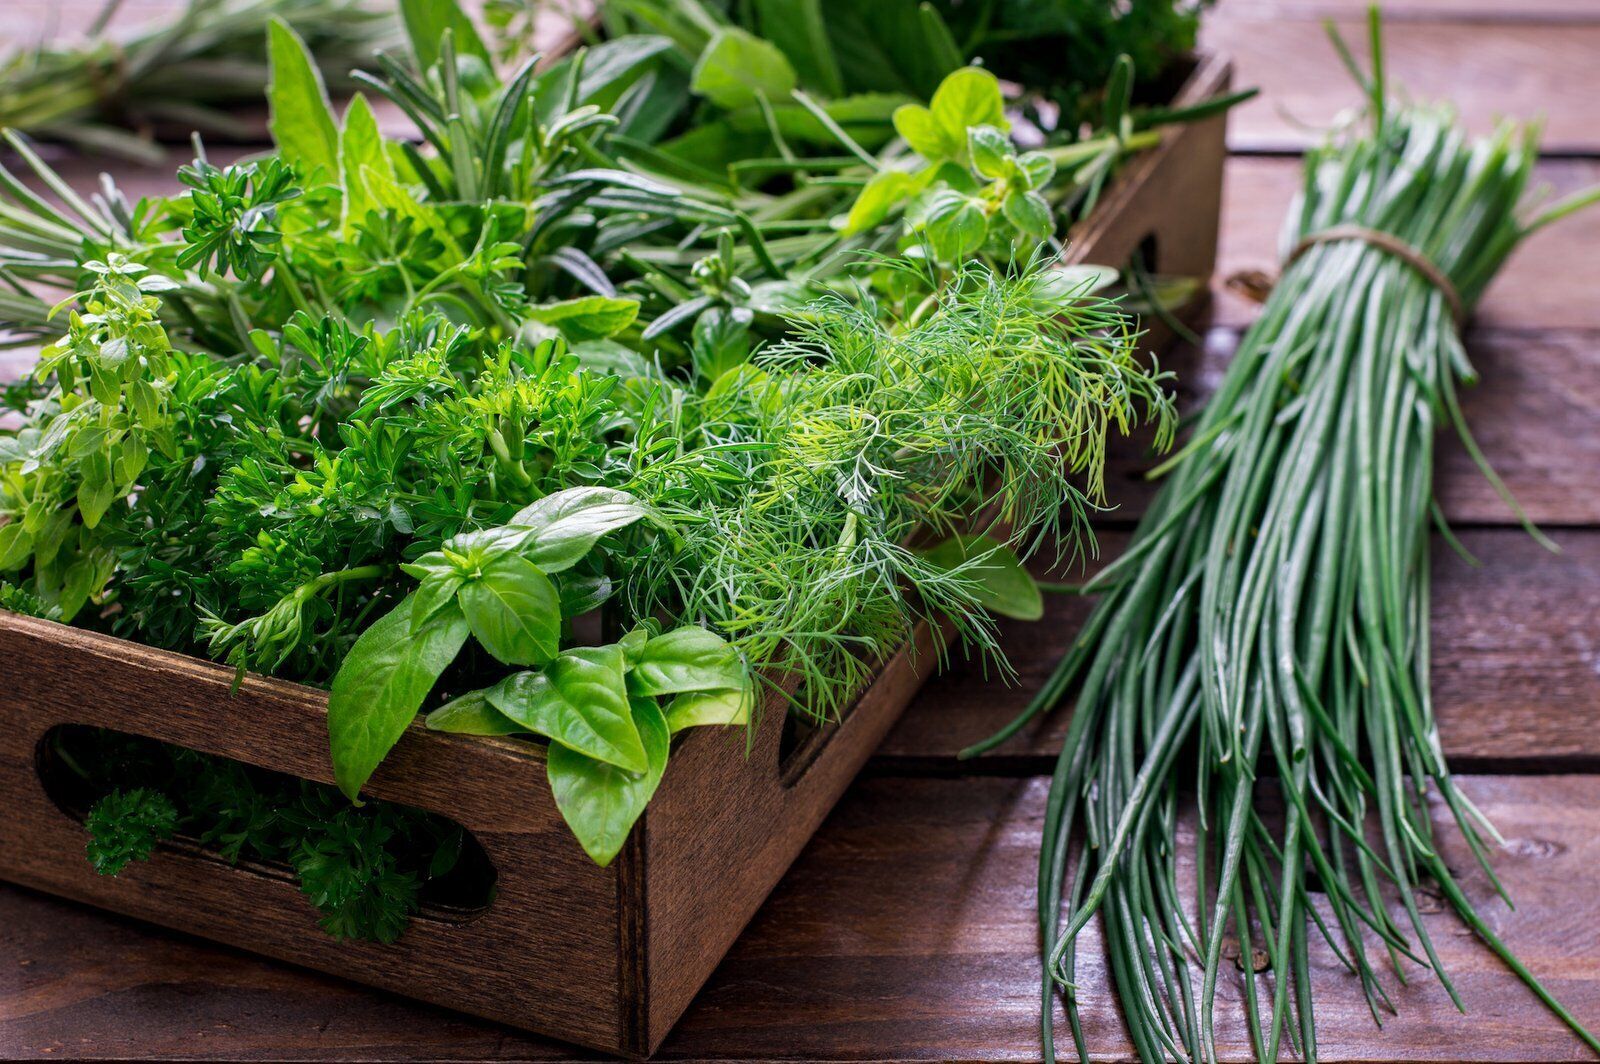 Quickly wilt and turn black: how not to store fresh herbs